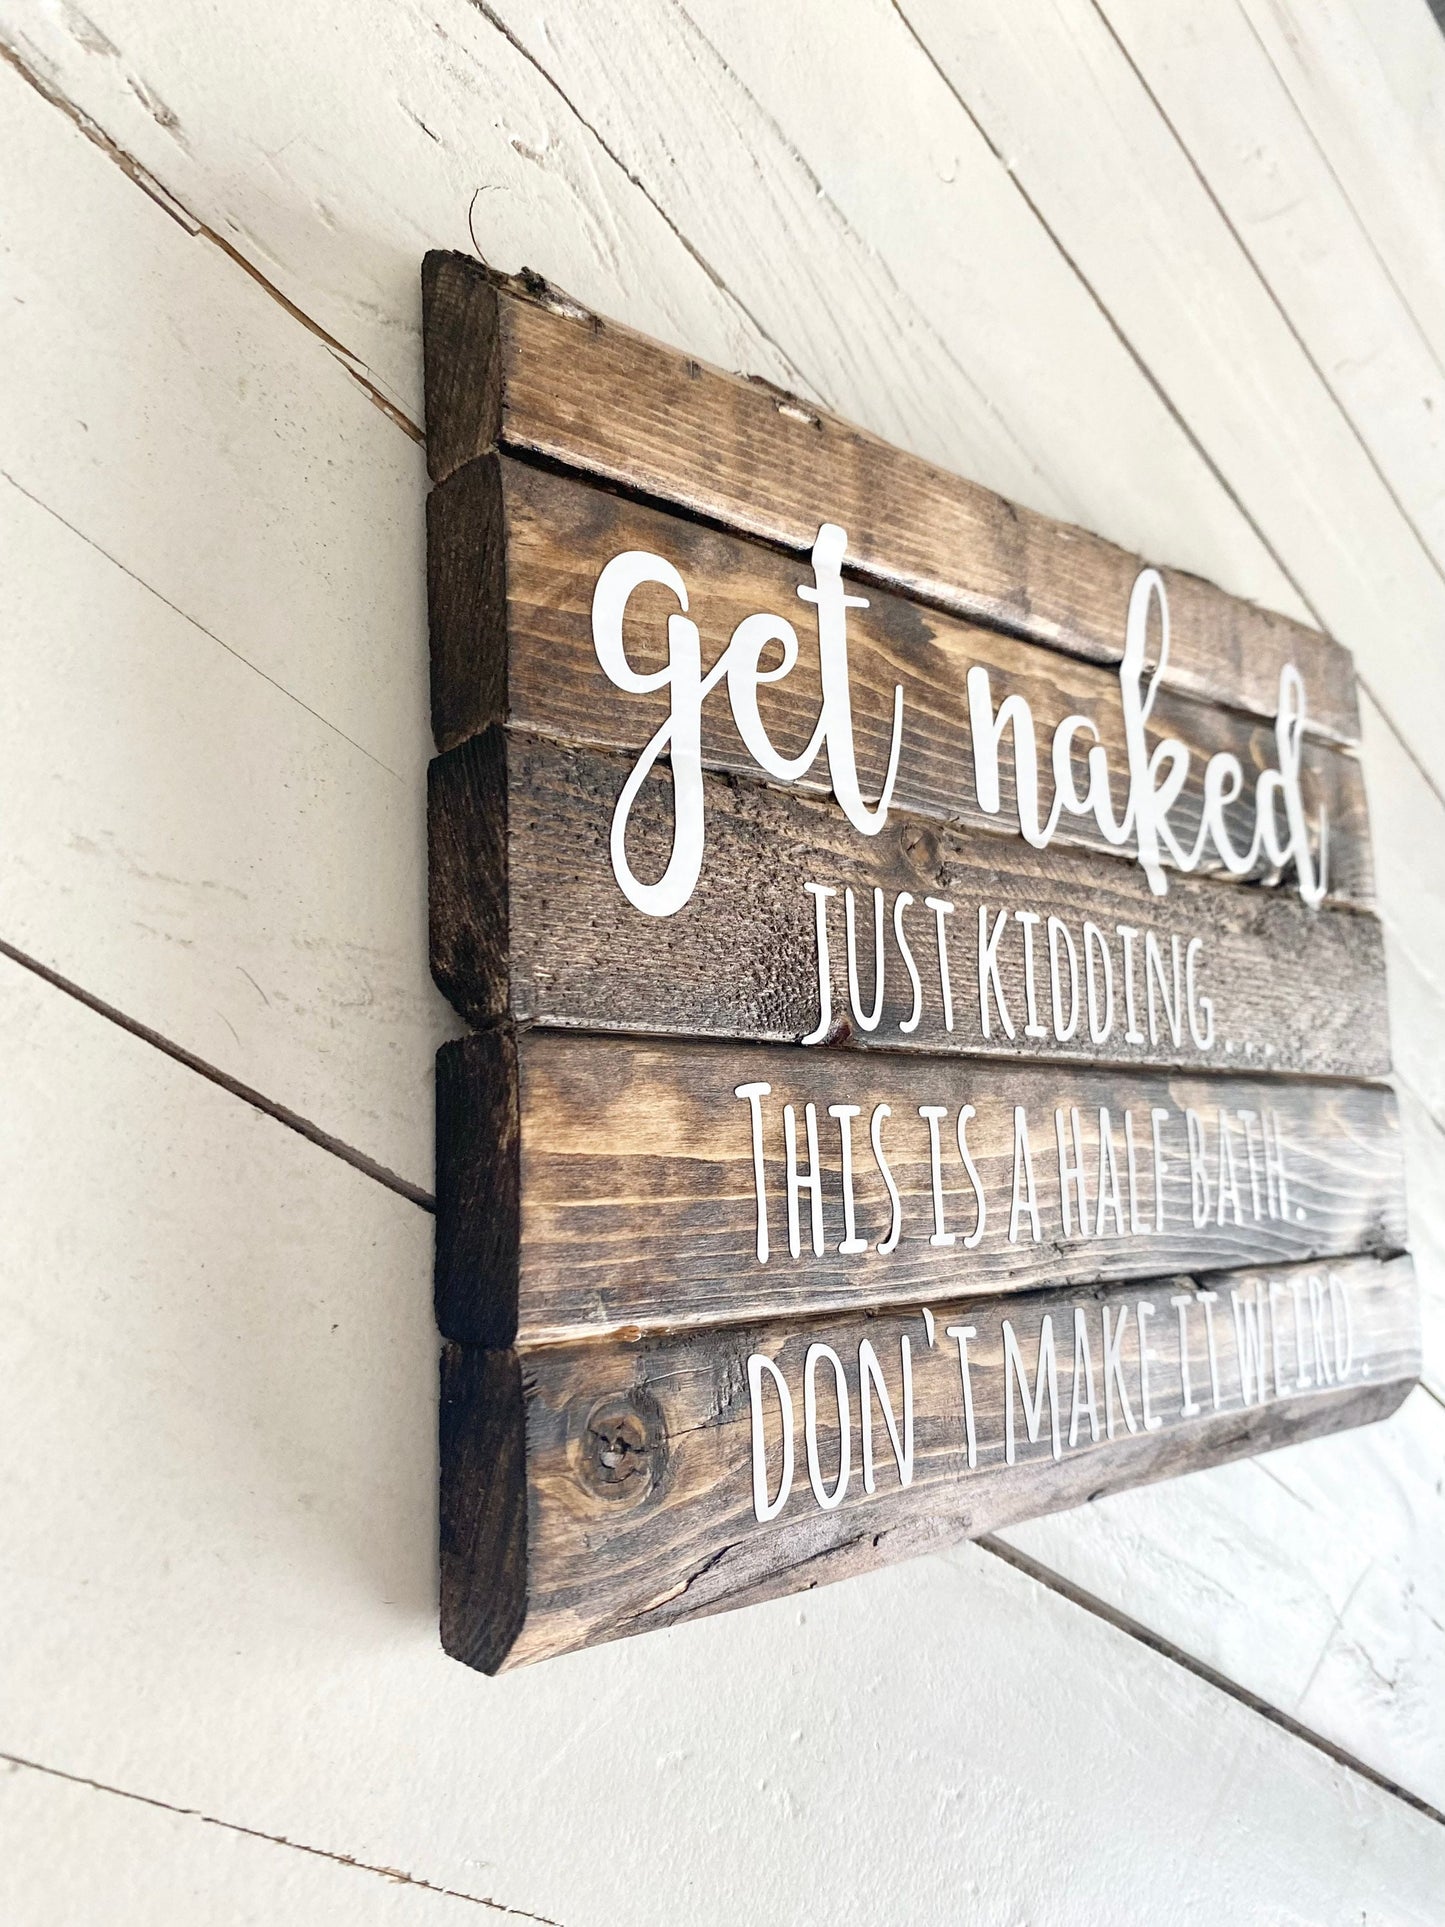 Get naked- just kidding...this is a half bath. Don't make it weird, Wooden Bathroom Sign